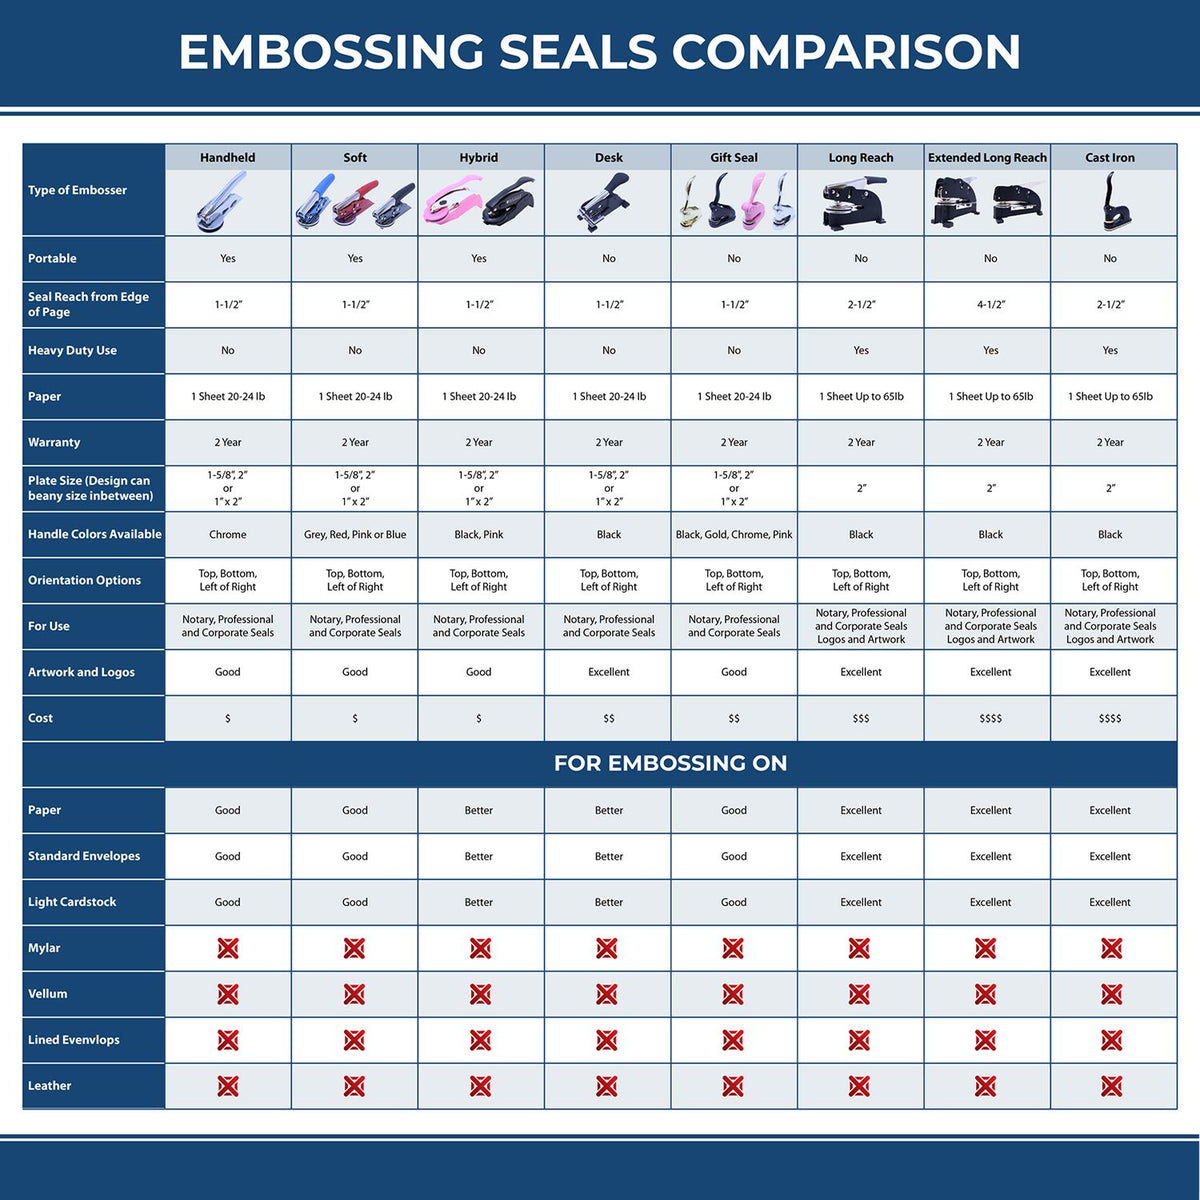 A comparison chart for the different types of mount models available for the Heavy Duty Cast Iron Louisiana Land Surveyor Seal Embosser.